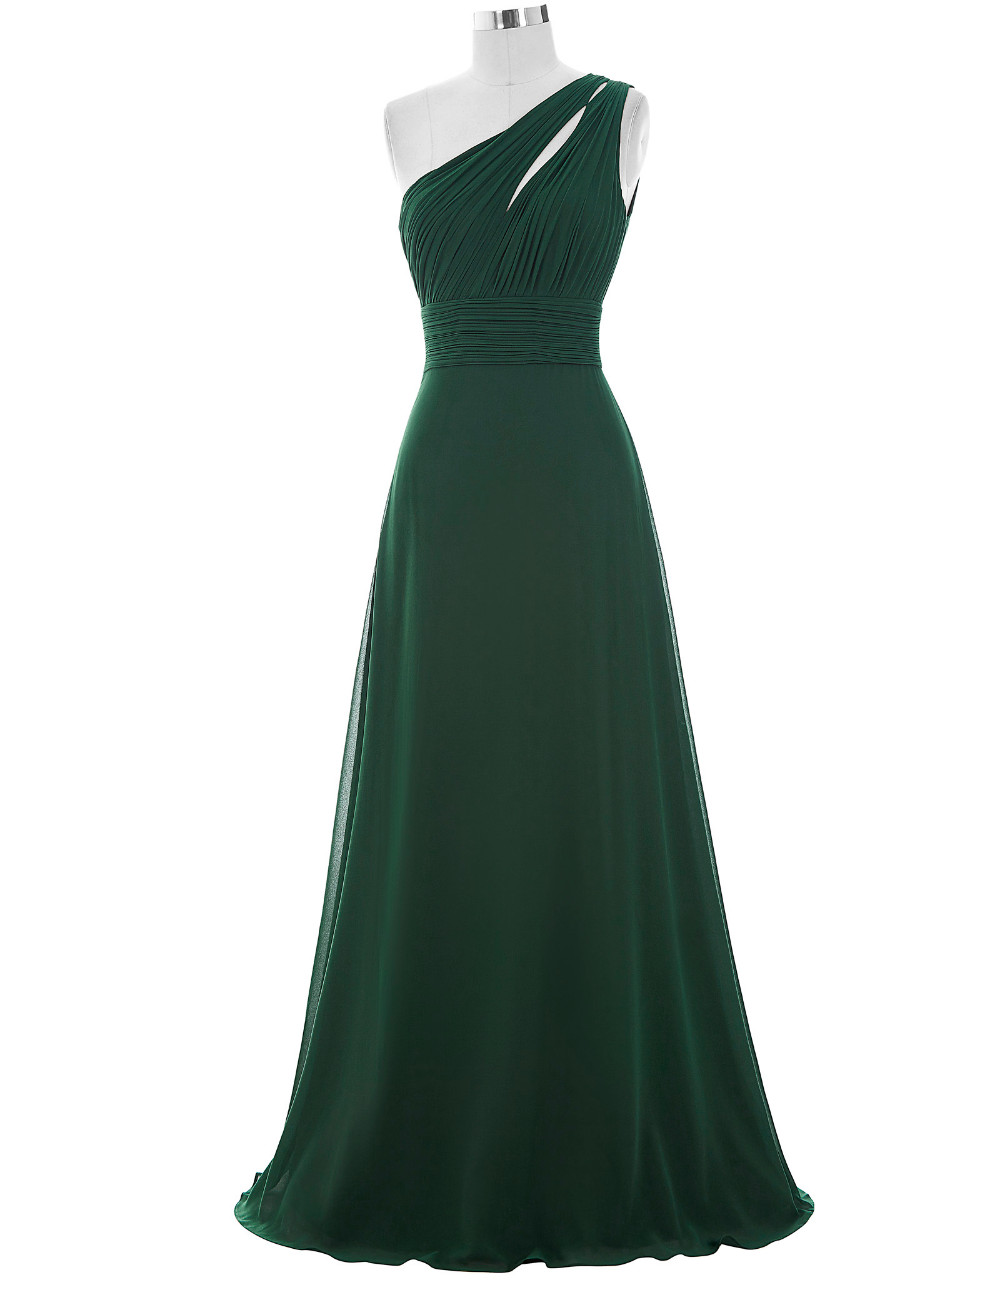 Forest Green Floor Length Chiffon A-line Evening Dress Featuring Ruched One Shoulder Bodice With Cutout Detailing